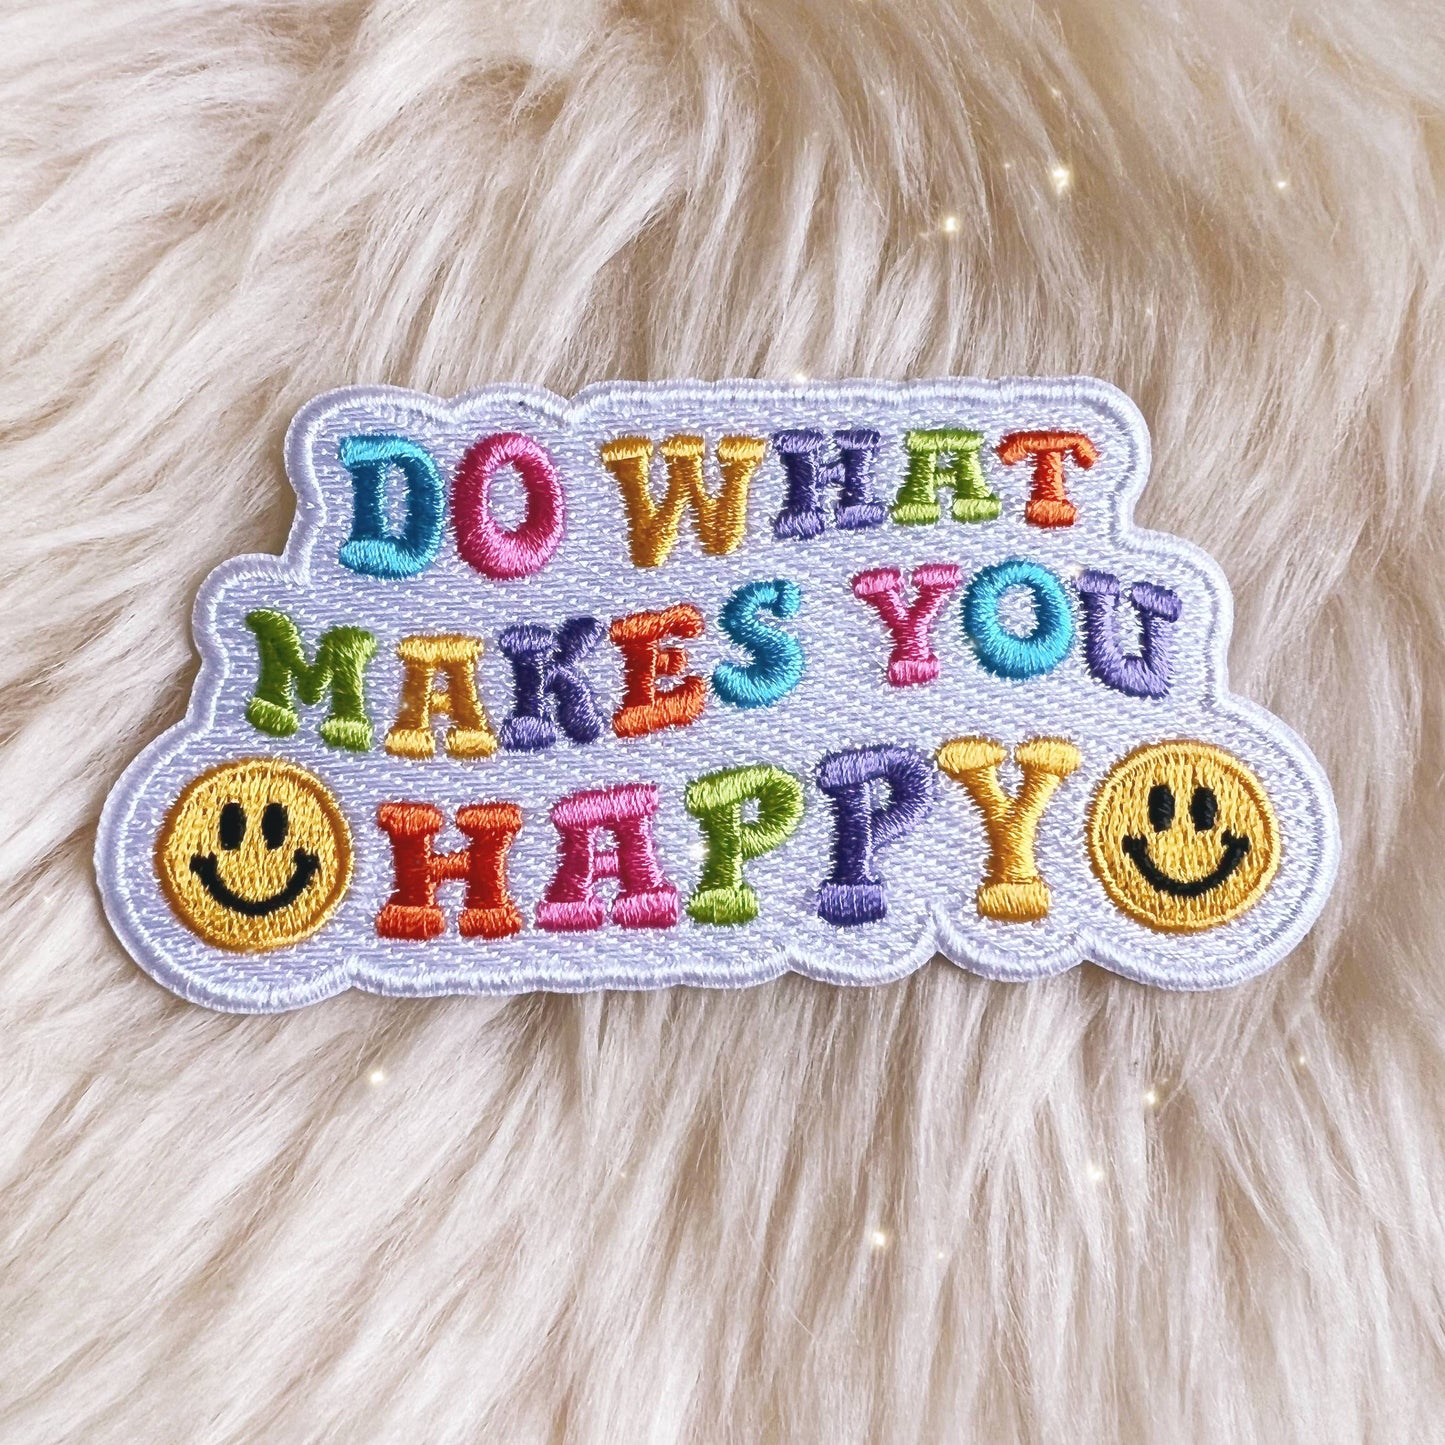 Wildflower + Co. - Positivity Quote Patches: Have a Nice Day